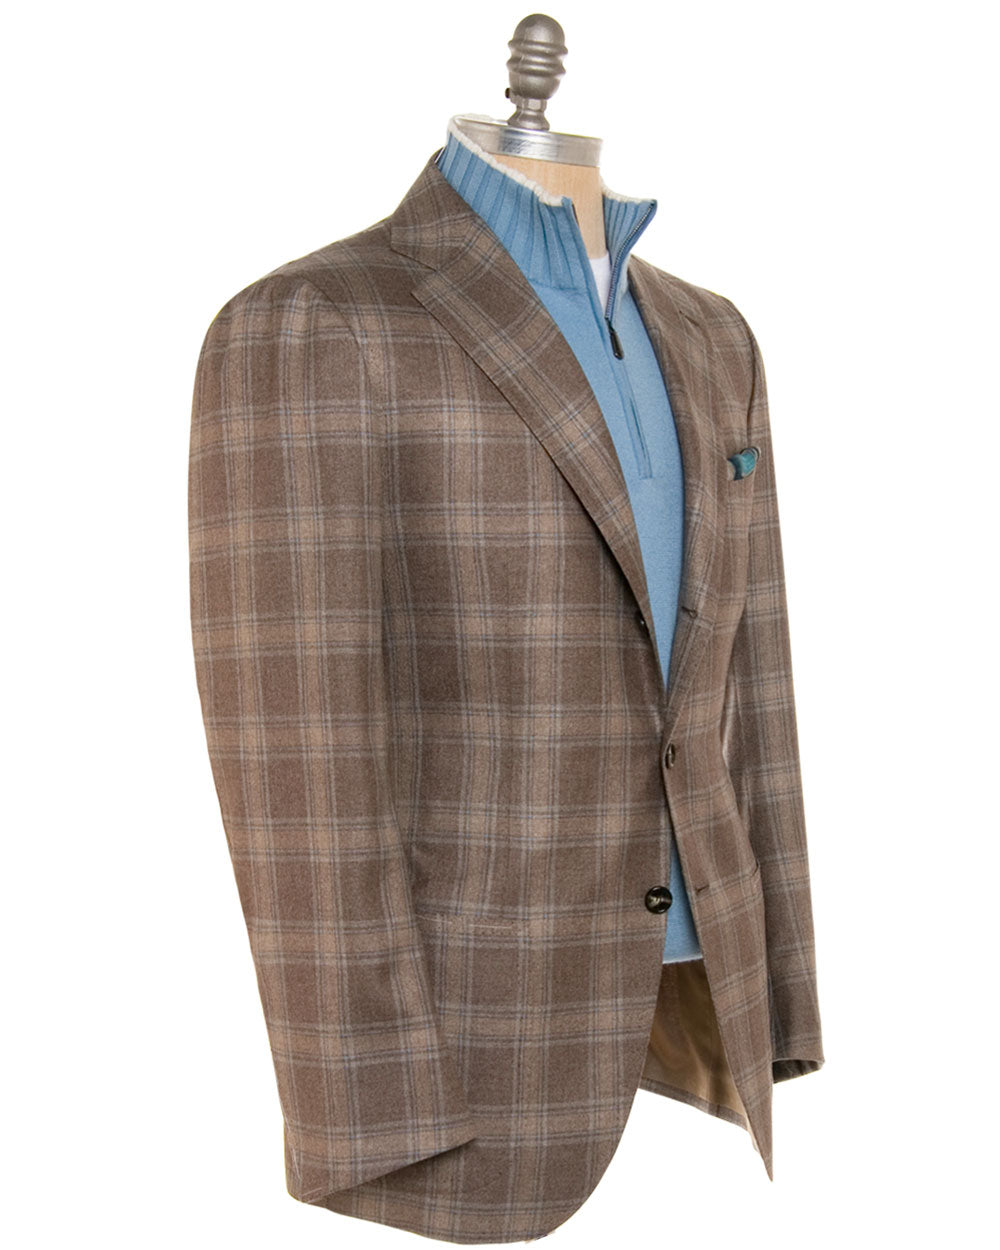 Brown and Teal Plaid Sportcoat